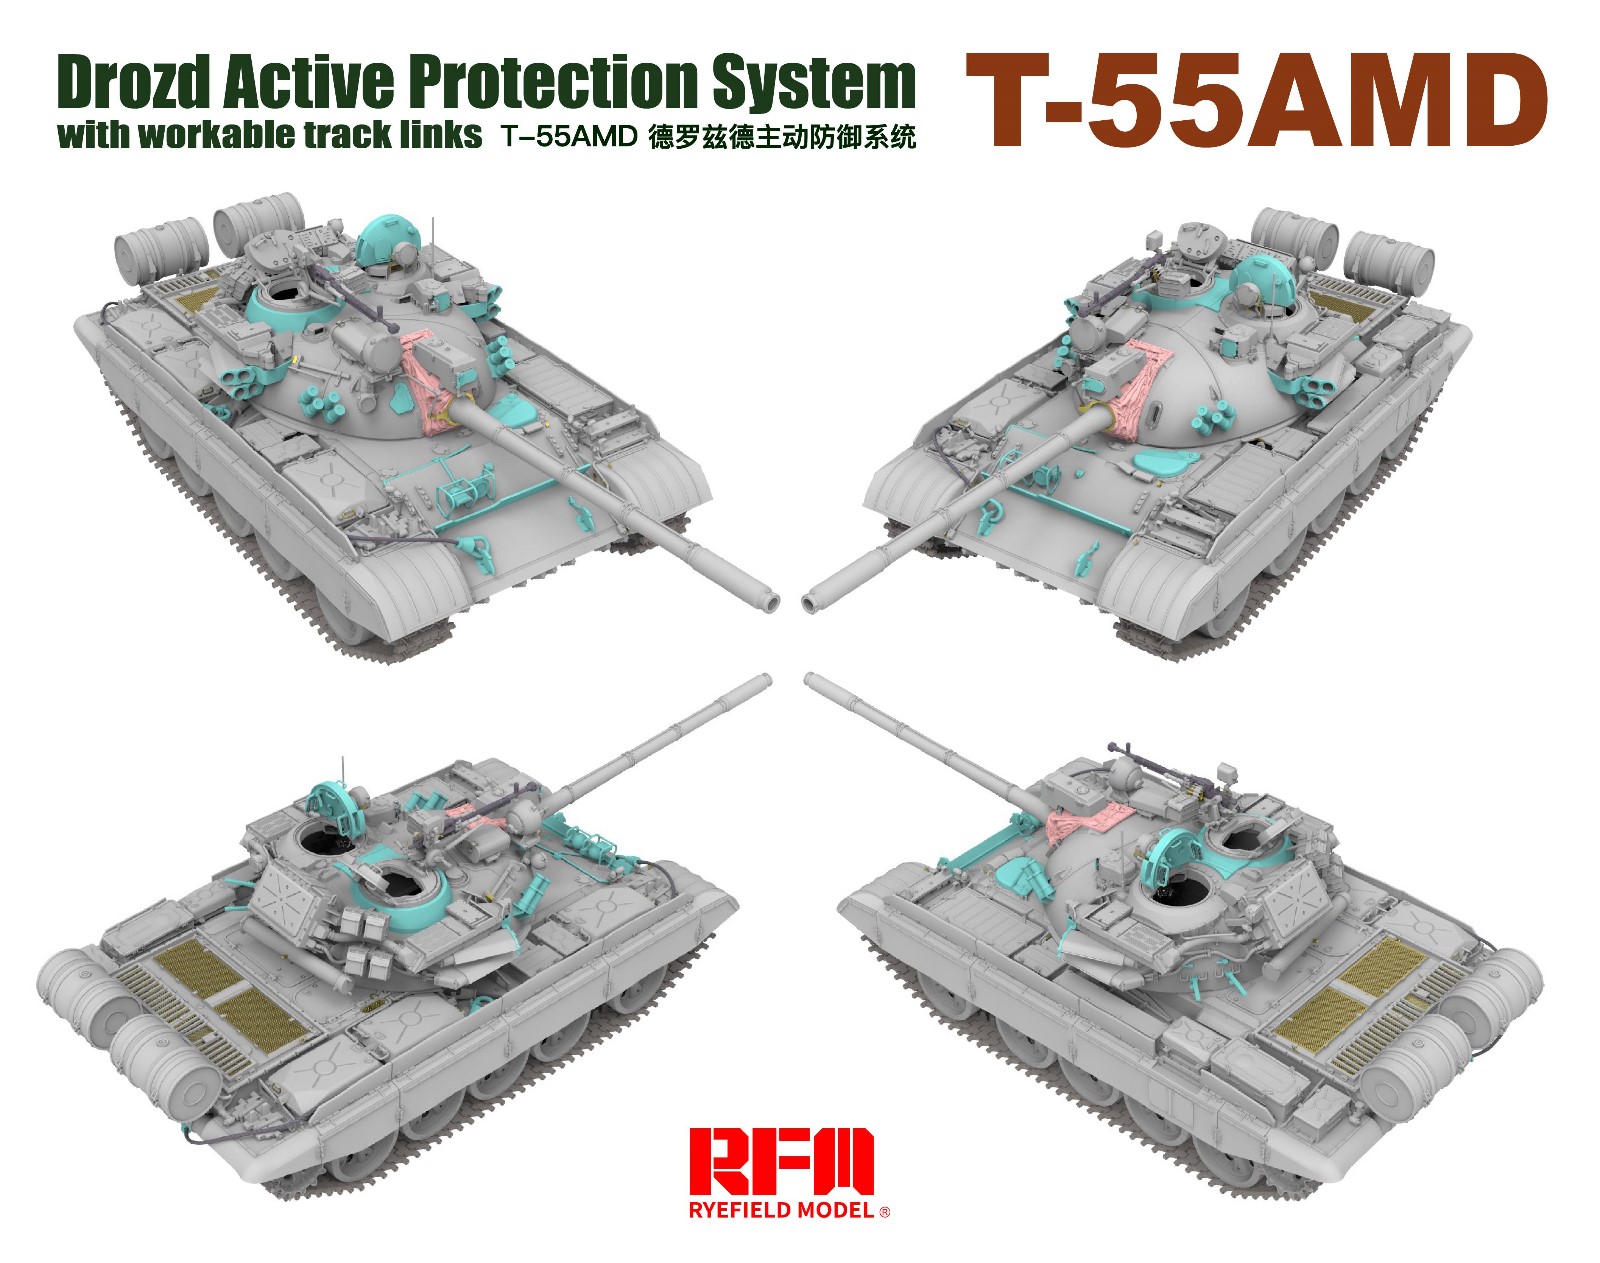 T-55AMD Drozd Active Protection System with workable tracks